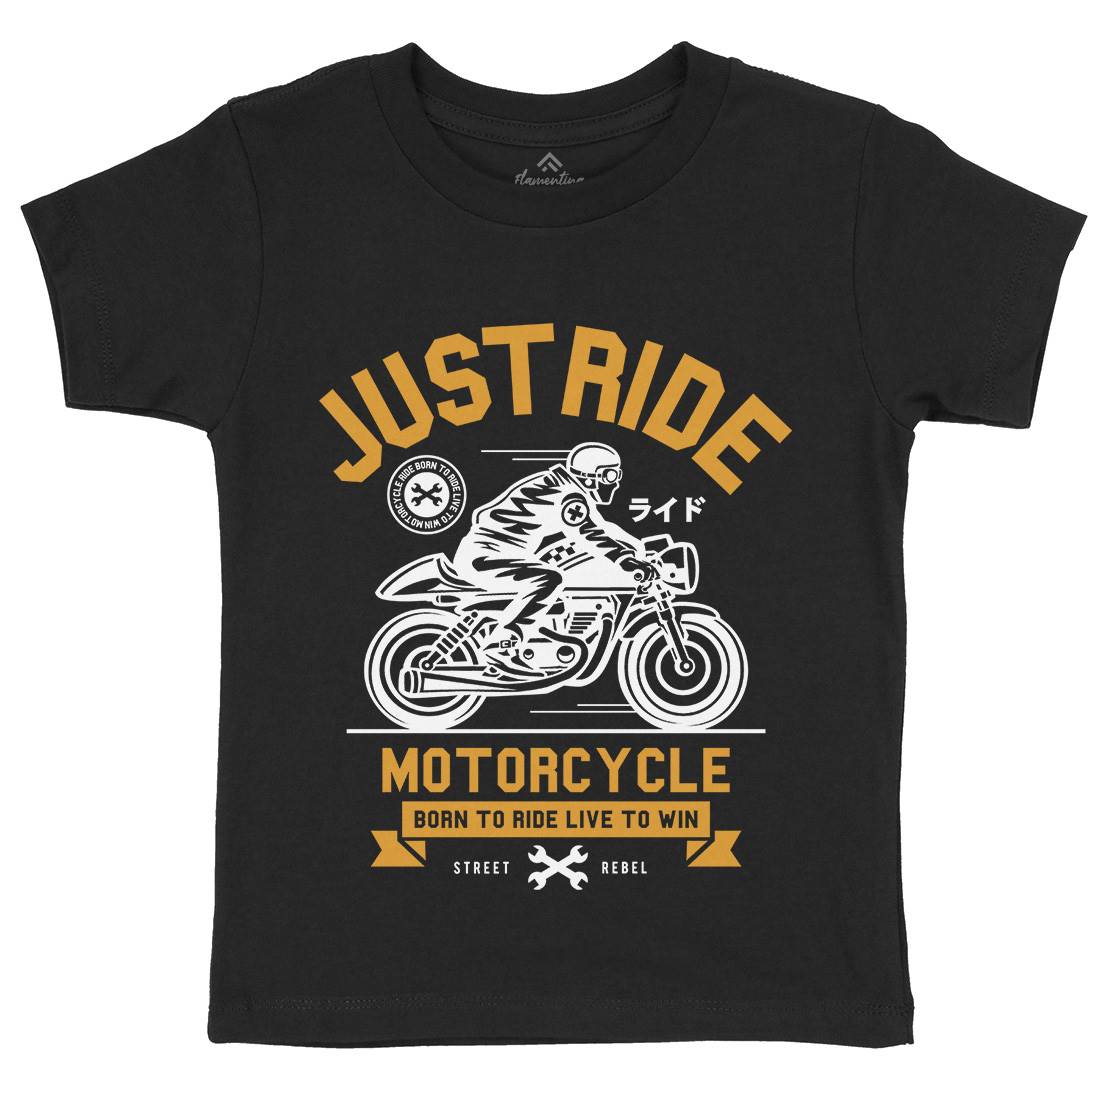 Just Ride Kids Crew Neck T-Shirt Motorcycles A244